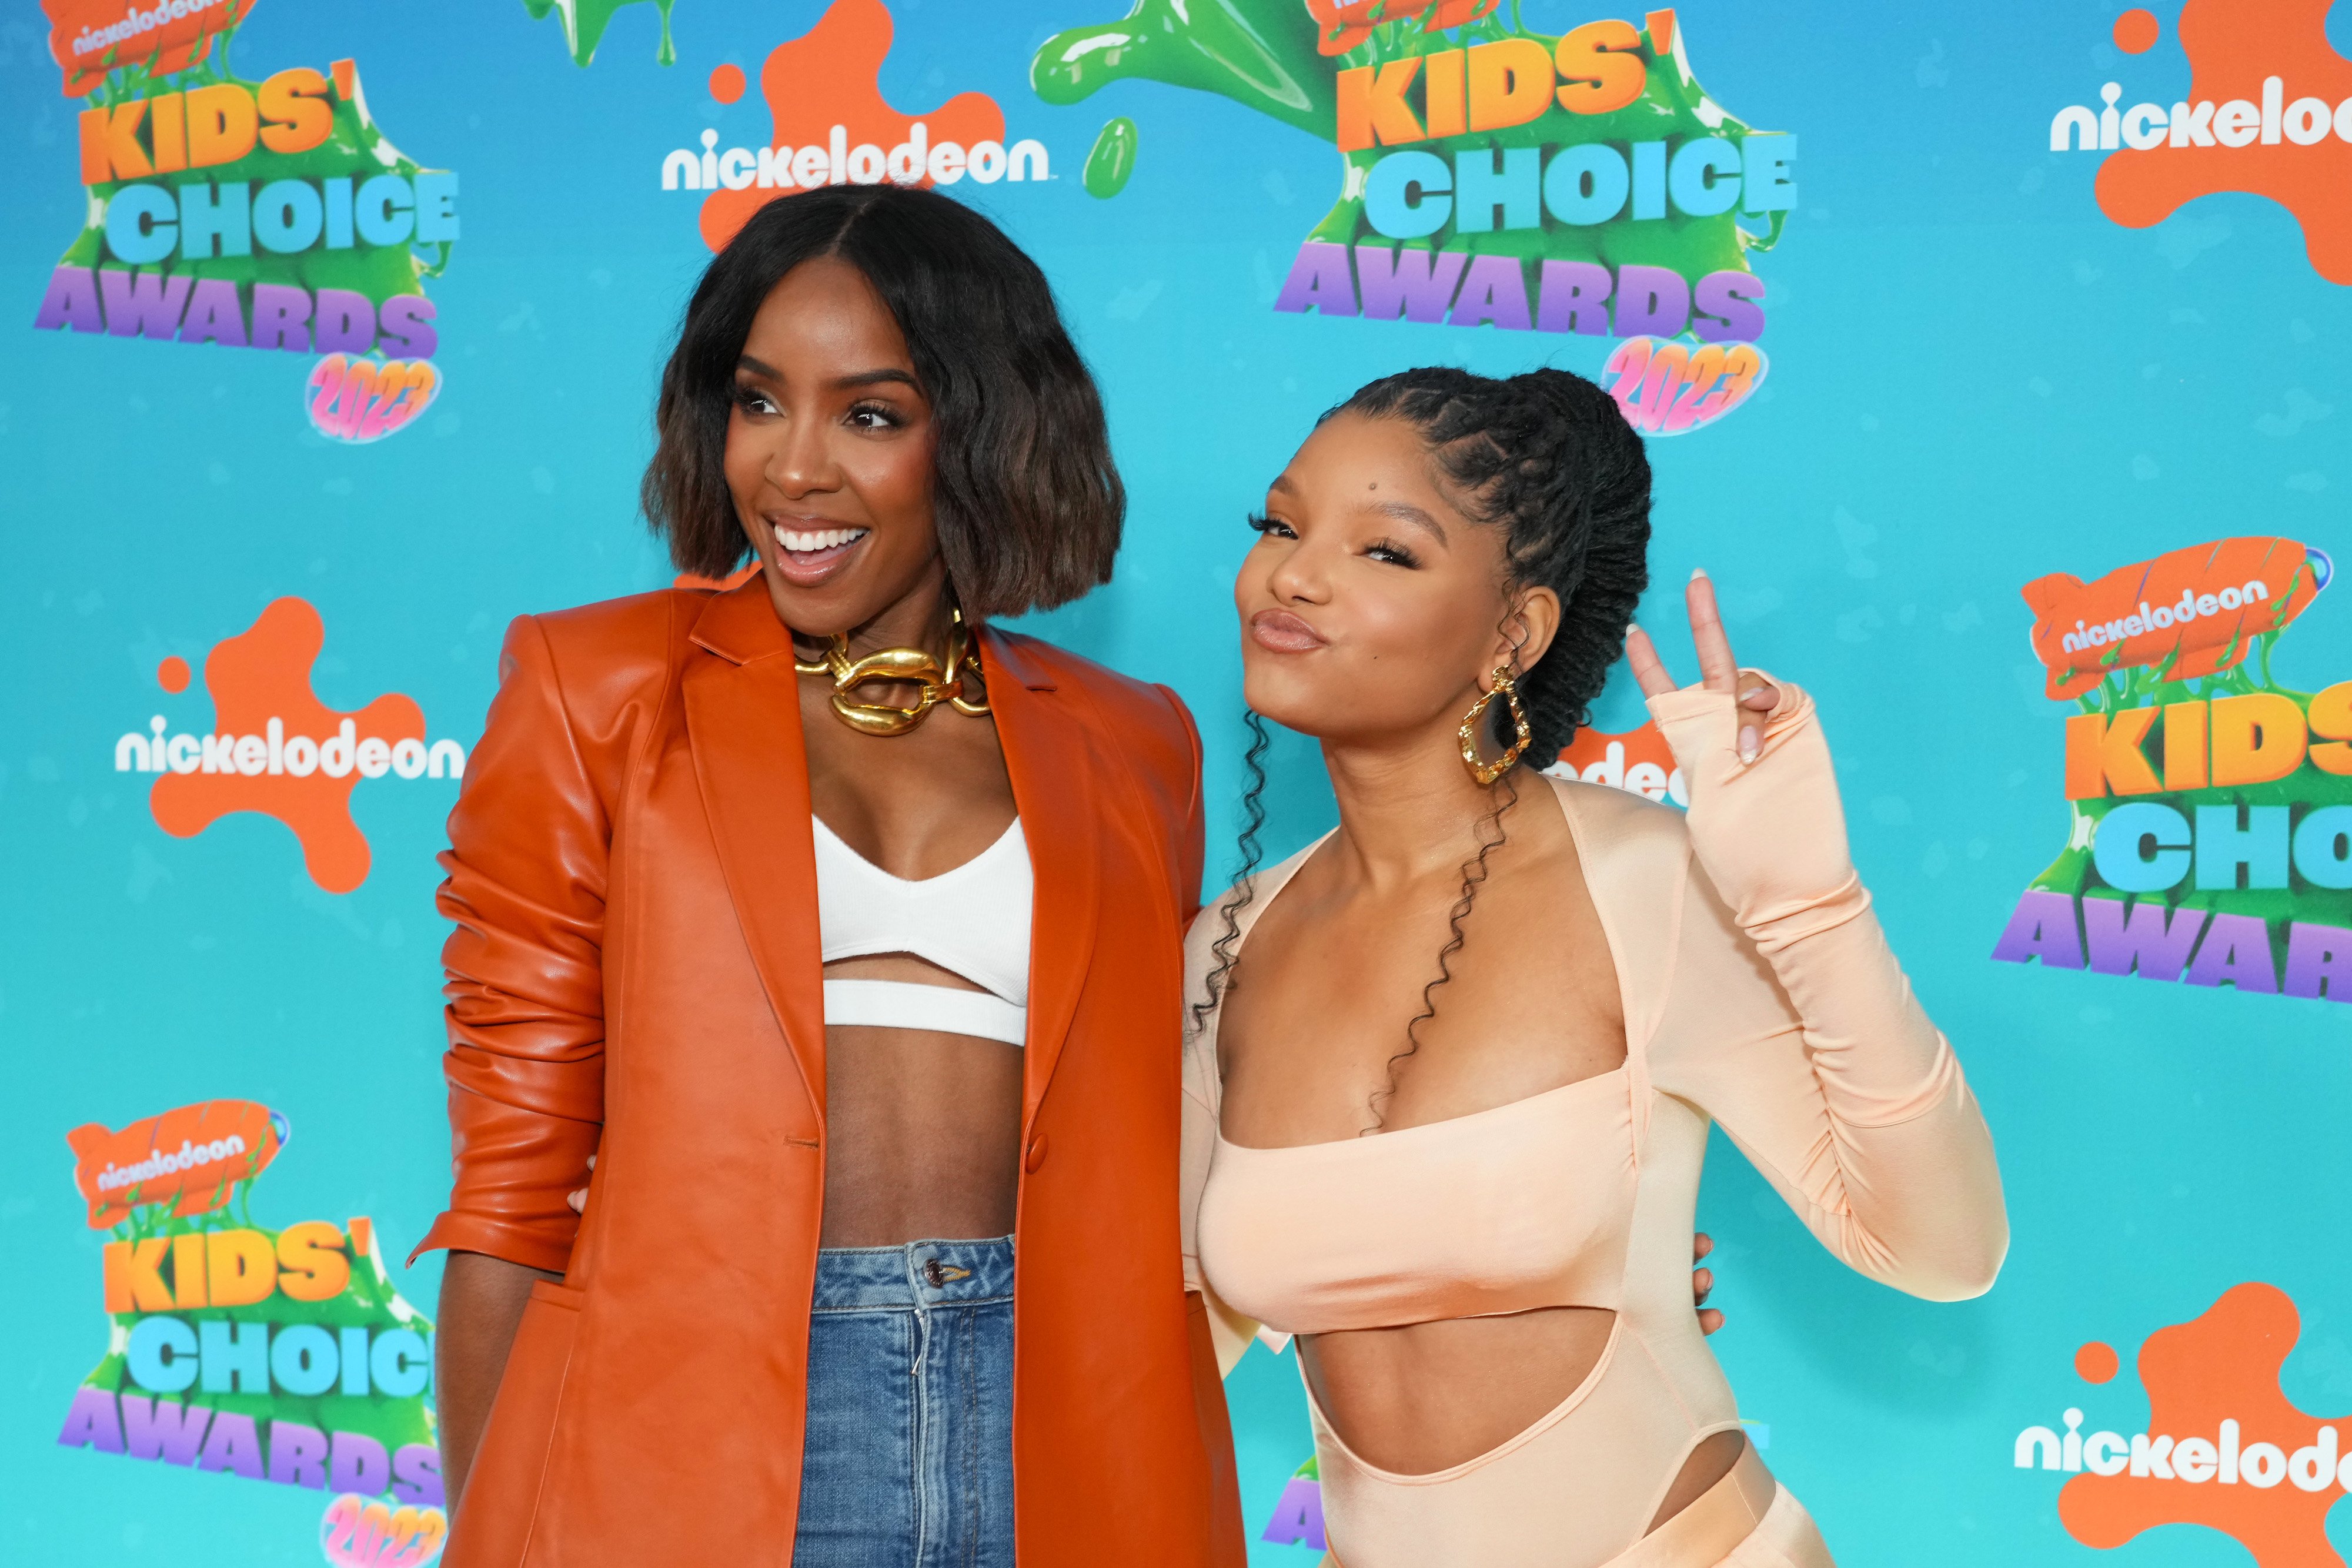 Kelly Rowland and Halle Bailey attend the 2023 Nickelodeon Kids' Choice Awards at Microsoft Theater on March 04, 2023 in Los Angeles, California. (Photo by Kevin Mazur/Getty Images for Nickelodeon)